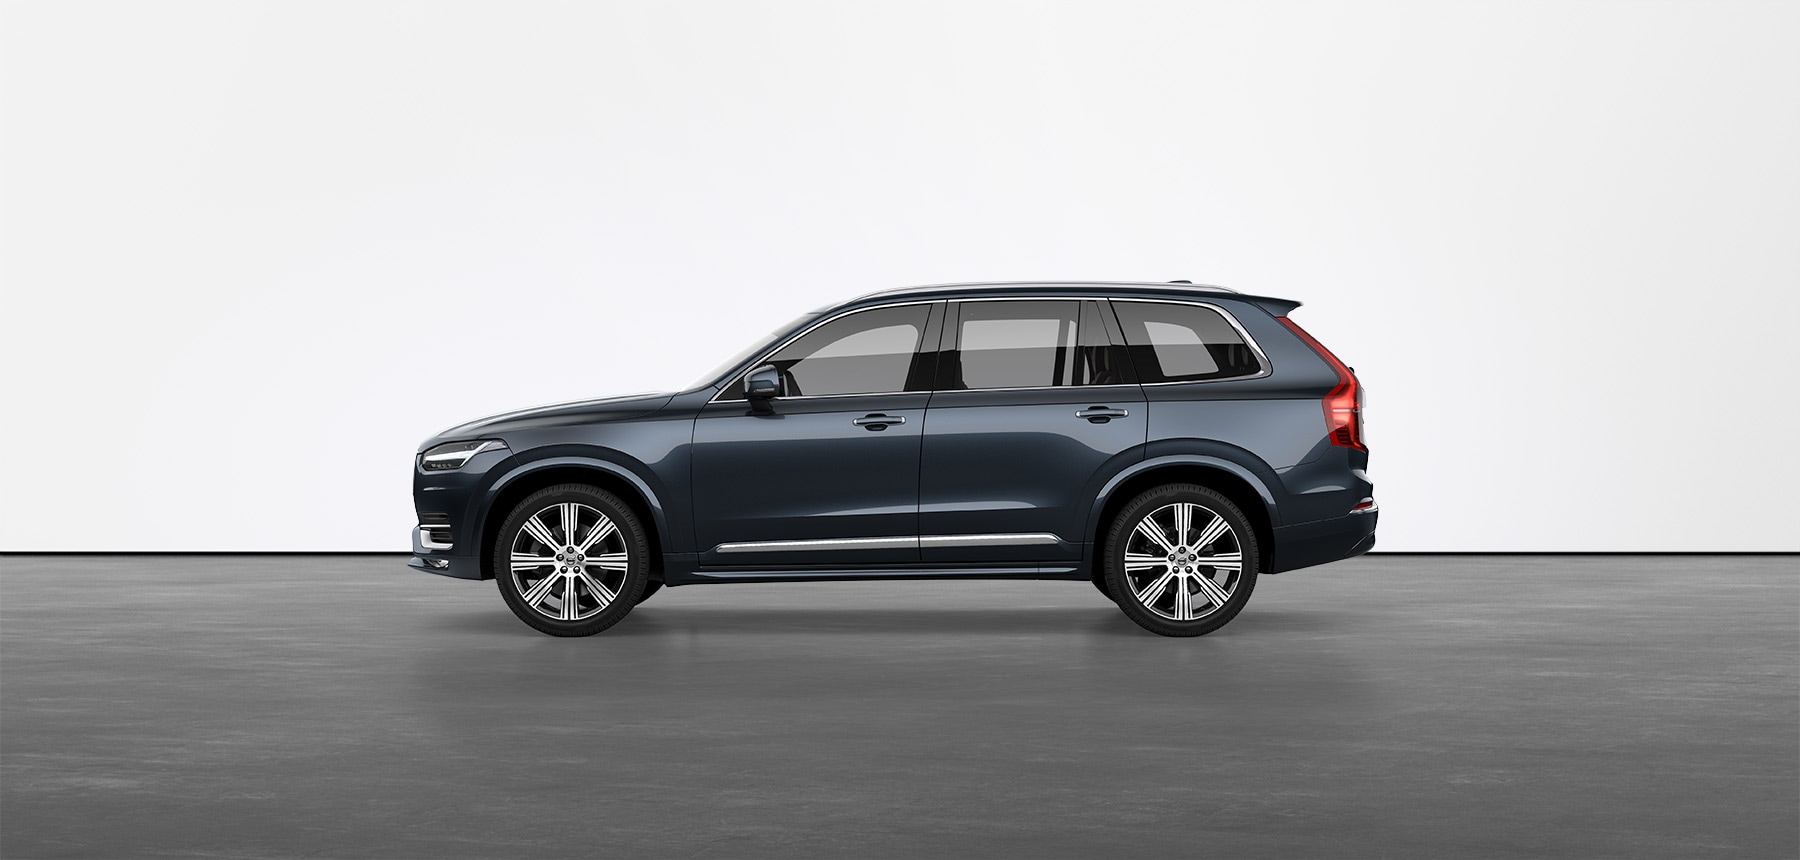 A silver Volvo XC90 compact SUV standing still on grey floor in a studio